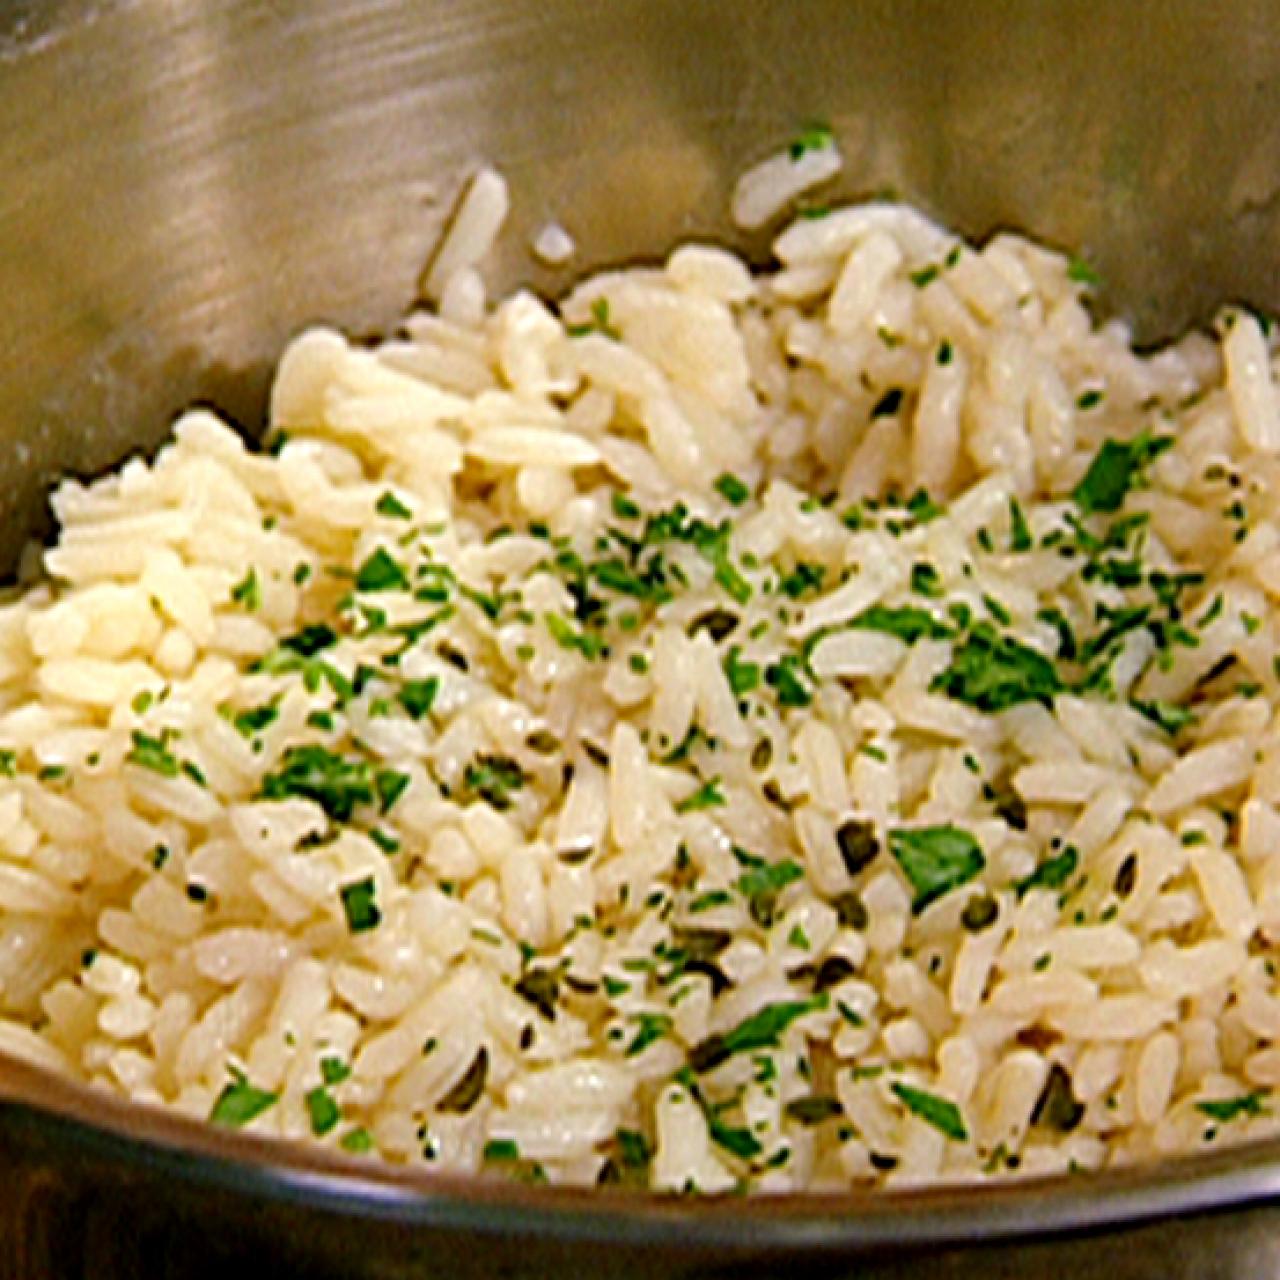 Make Perfect Rice Everytime With a Kitchen Towel - Forkly